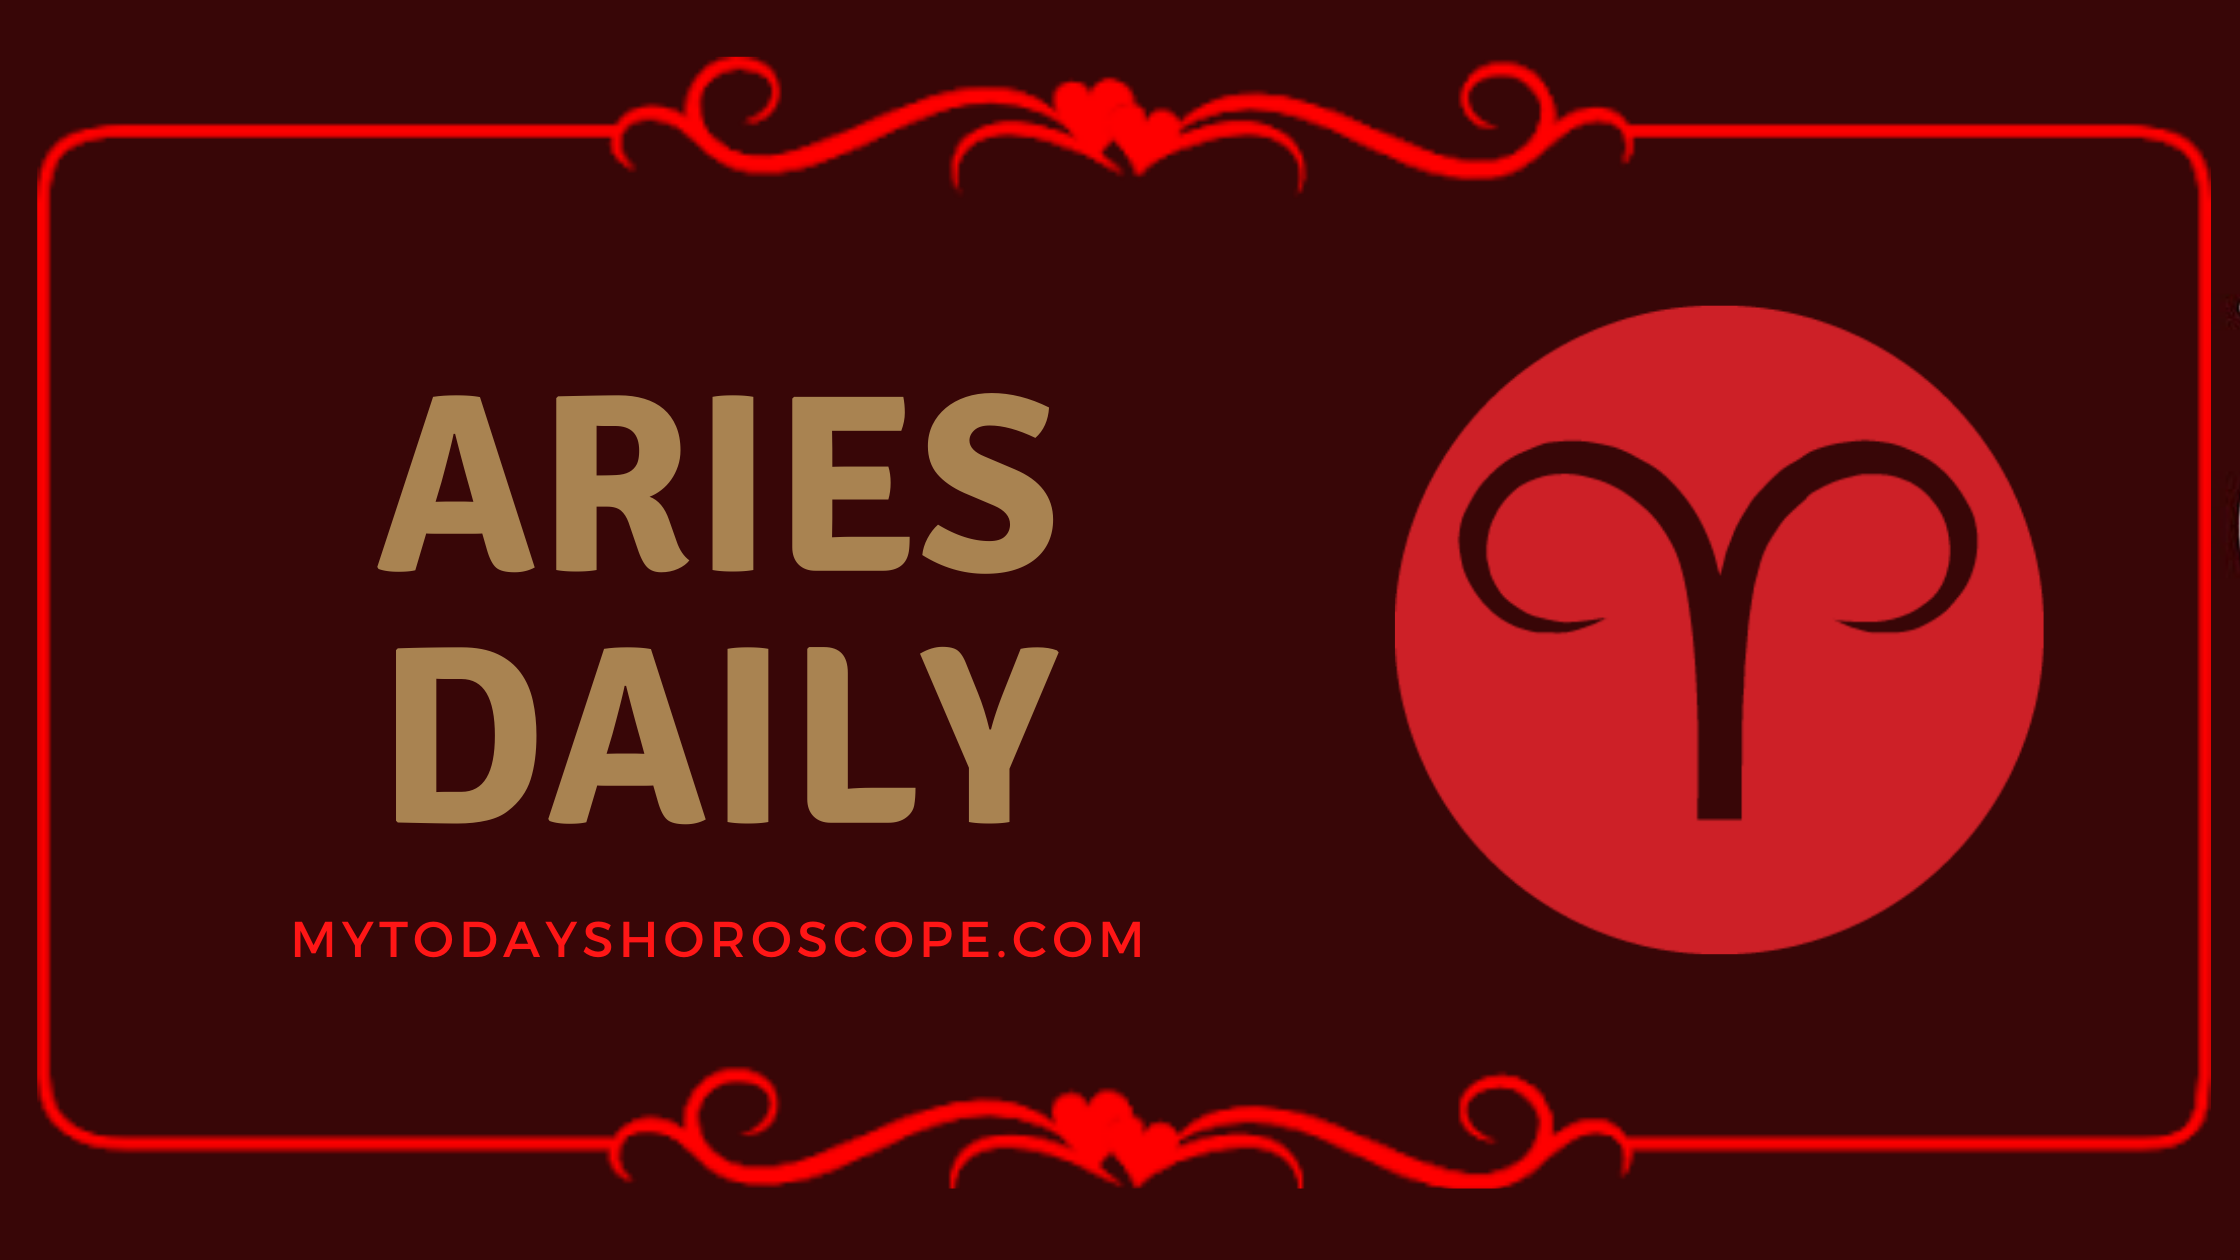 Aries Most Accurate Daily Horoscope for Love, Money Luck, Work, Wellbeing